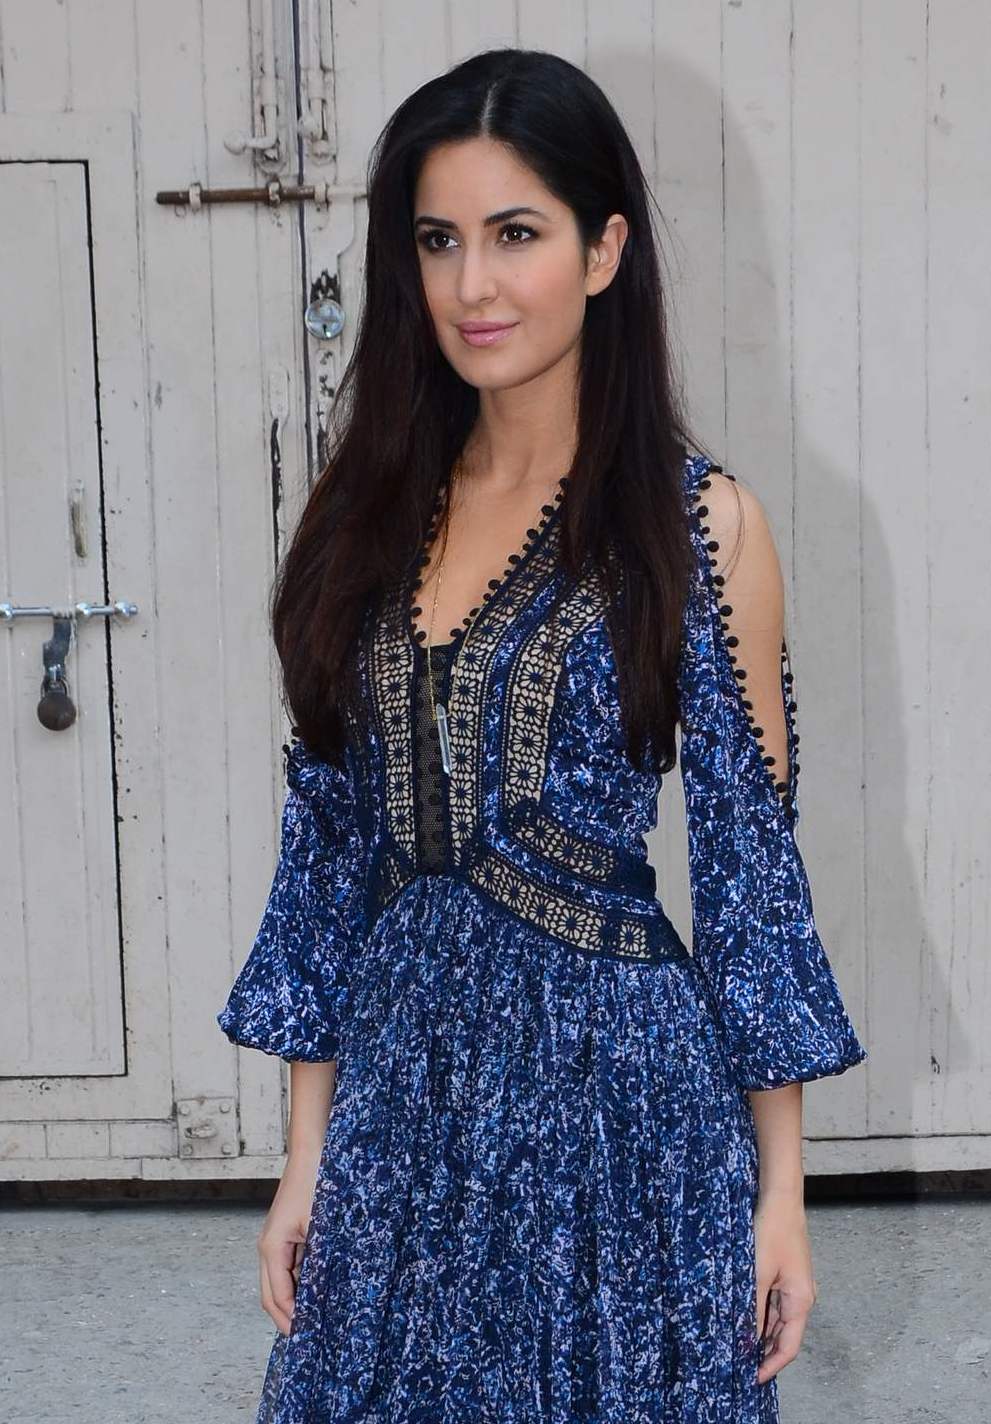 High Quality Bollywood Celebrity Pictures Katrina Kaif Looks Gorgeous In Blue Dress At Film